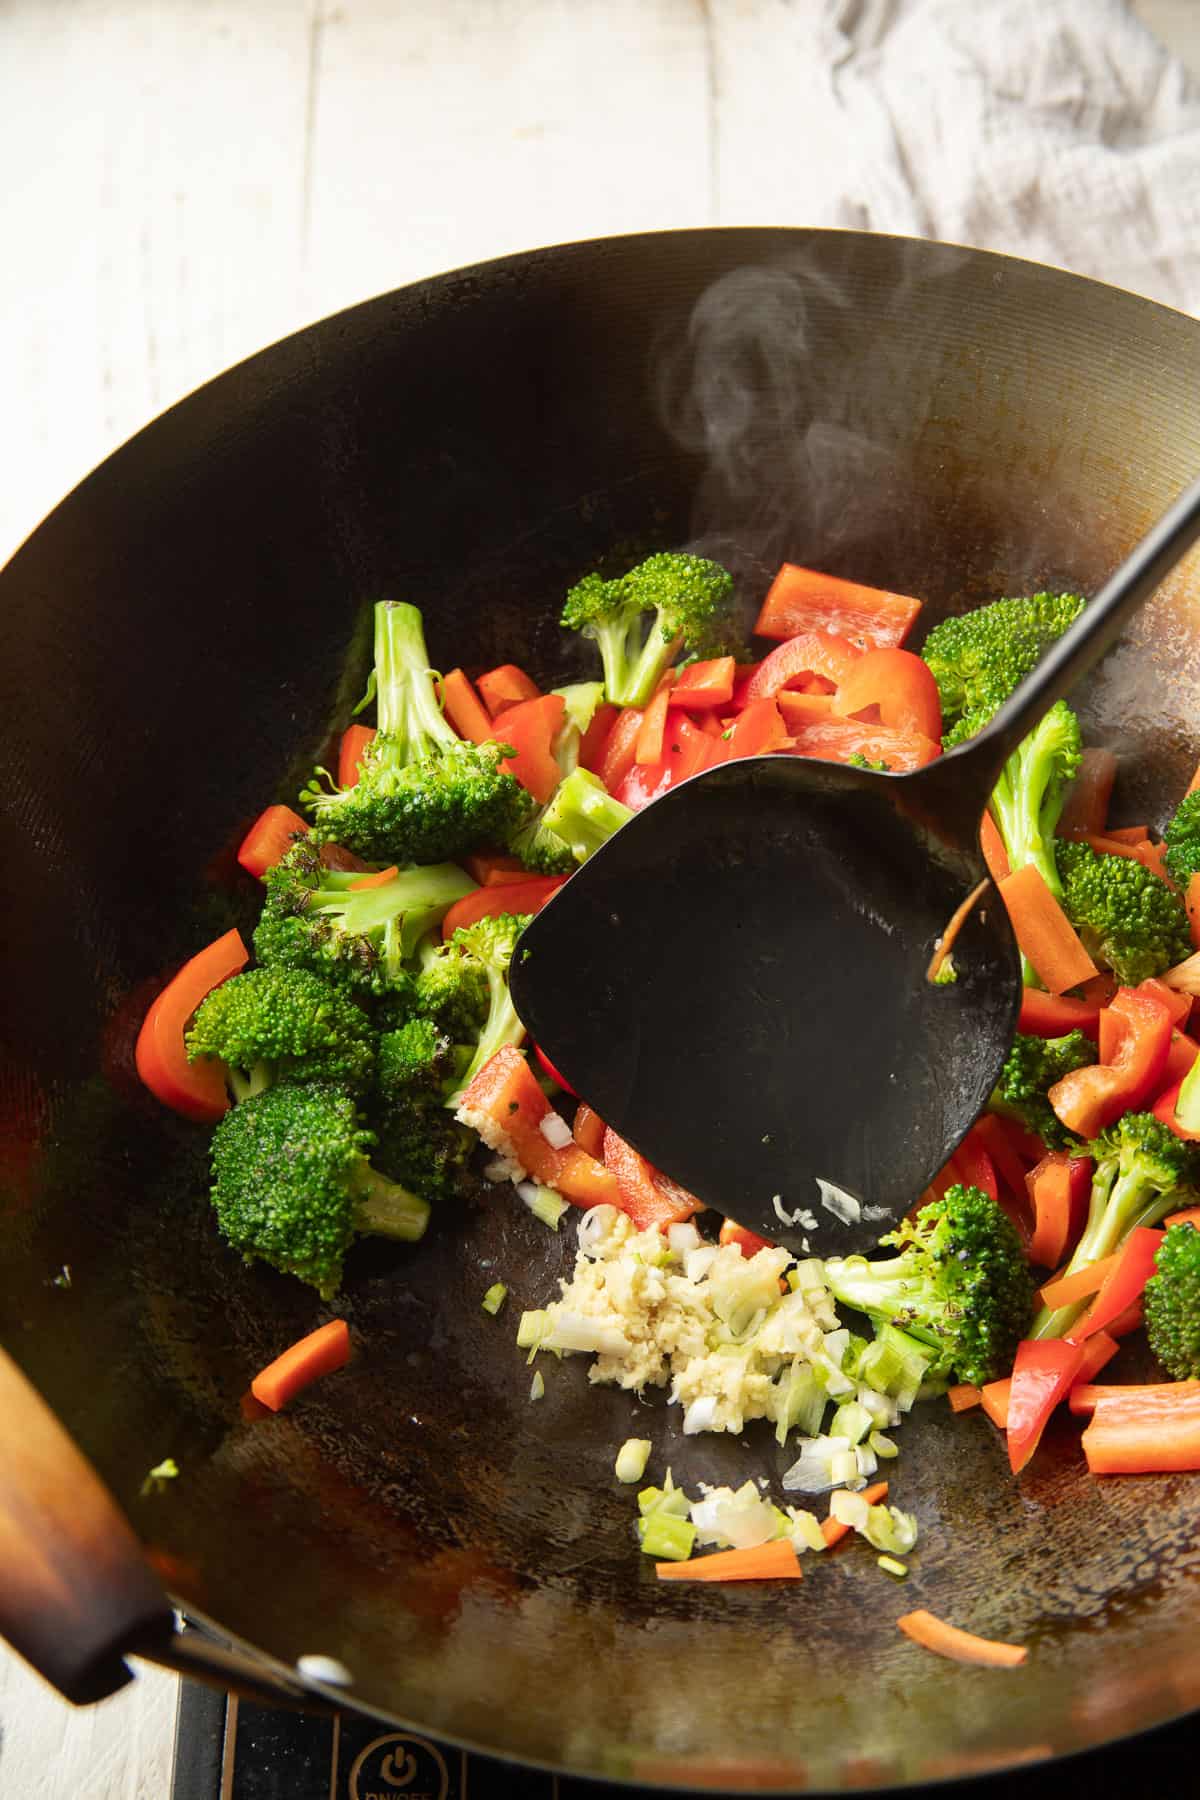 Ginger and garlic cooking in a wok with vegetables.